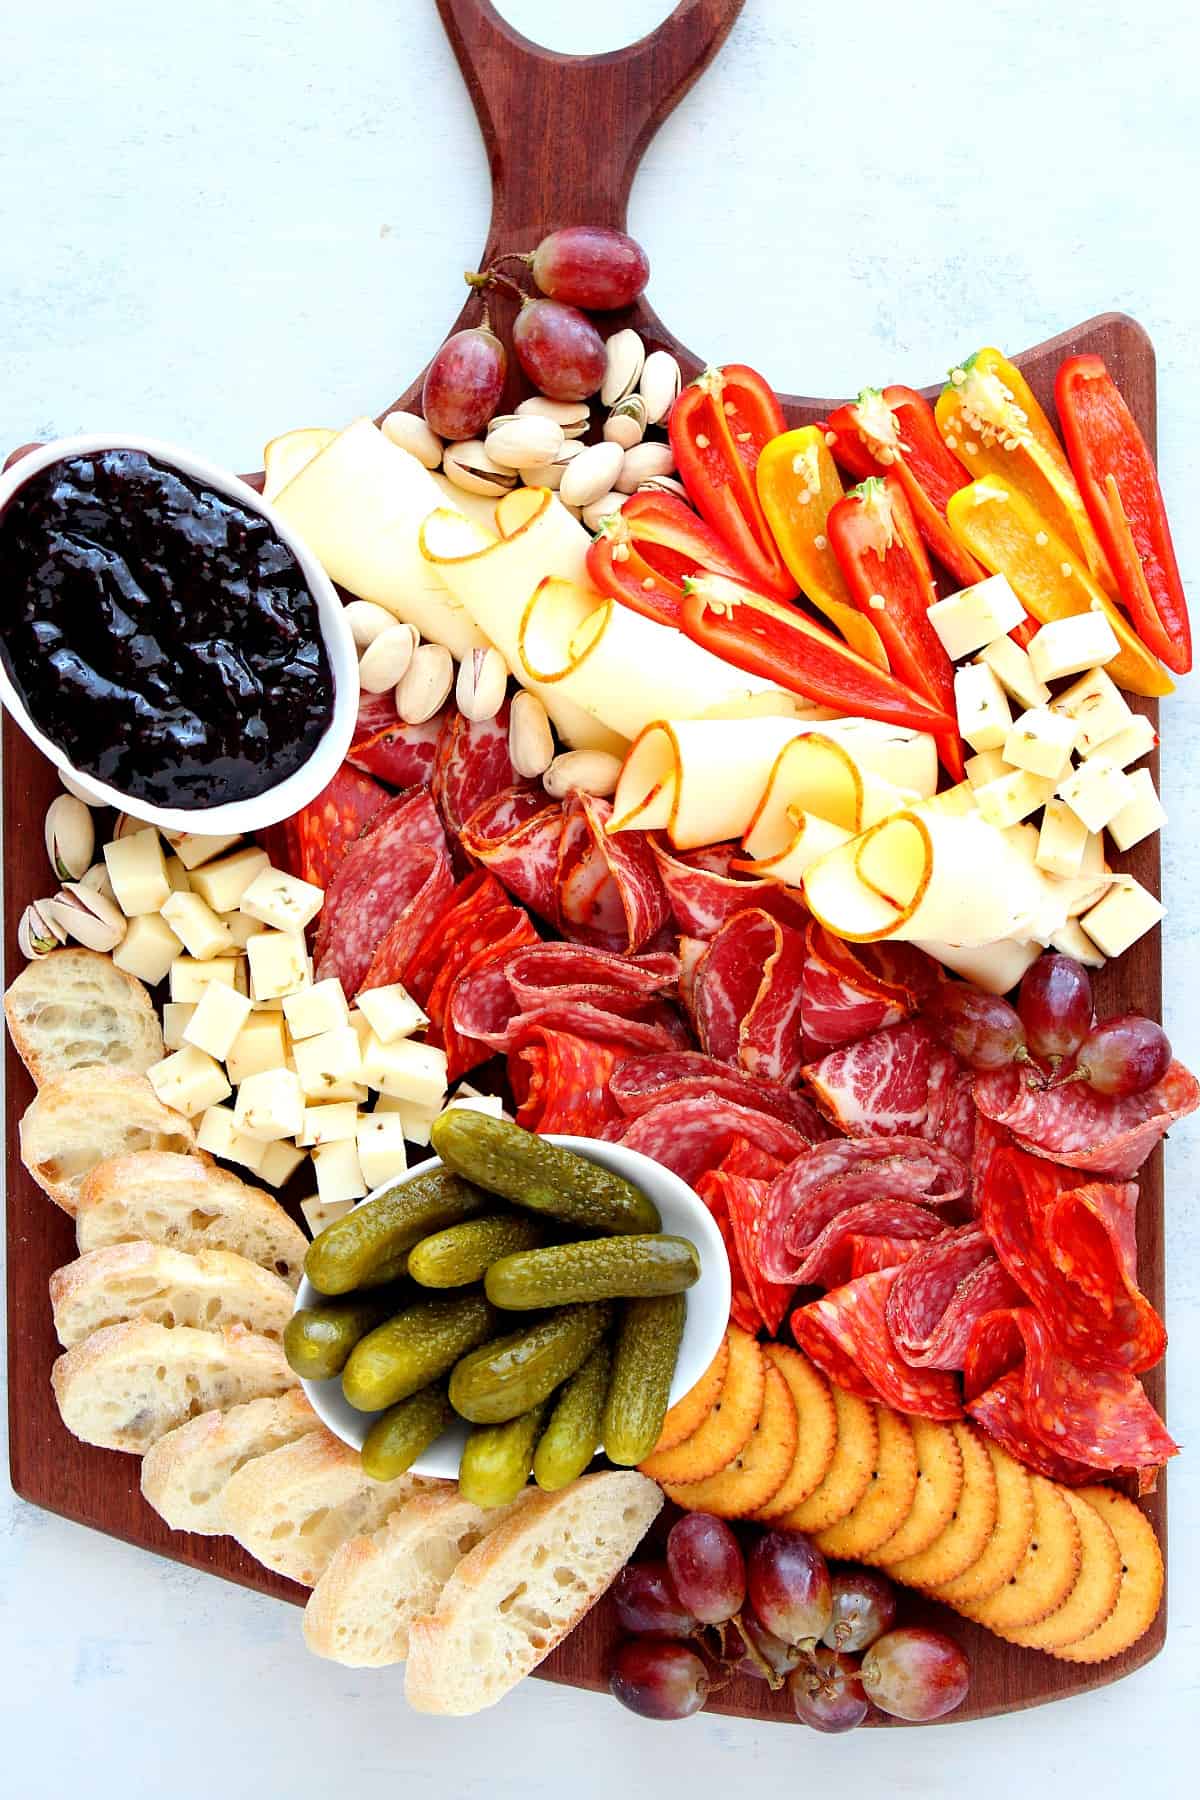 Cheeses, meats and veggies on a board.